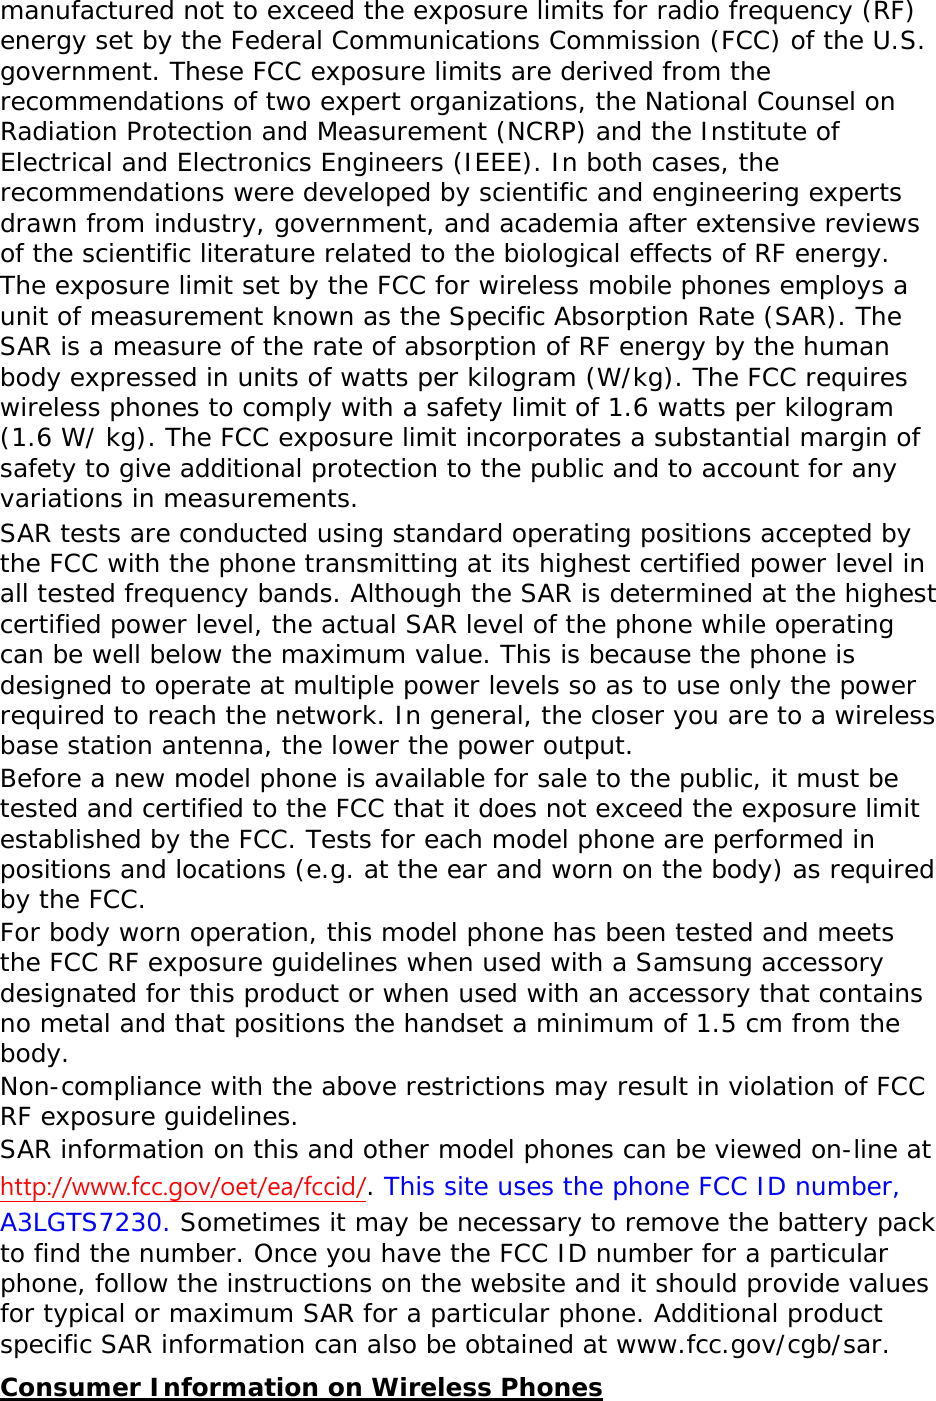 manufactured not to exceed the exposure limits for radio frequency (RF) energy set by the Federal Communications Commission (FCC) of the U.S. government. These FCC exposure limits are derived from the recommendations of two expert organizations, the National Counsel on Radiation Protection and Measurement (NCRP) and the Institute of Electrical and Electronics Engineers (IEEE). In both cases, the recommendations were developed by scientific and engineering experts drawn from industry, government, and academia after extensive reviews of the scientific literature related to the biological effects of RF energy. The exposure limit set by the FCC for wireless mobile phones employs a unit of measurement known as the Specific Absorption Rate (SAR). The SAR is a measure of the rate of absorption of RF energy by the human body expressed in units of watts per kilogram (W/kg). The FCC requires wireless phones to comply with a safety limit of 1.6 watts per kilogram (1.6 W/ kg). The FCC exposure limit incorporates a substantial margin of safety to give additional protection to the public and to account for any variations in measurements. SAR tests are conducted using standard operating positions accepted by the FCC with the phone transmitting at its highest certified power level in all tested frequency bands. Although the SAR is determined at the highest certified power level, the actual SAR level of the phone while operating can be well below the maximum value. This is because the phone is designed to operate at multiple power levels so as to use only the power required to reach the network. In general, the closer you are to a wireless base station antenna, the lower the power output. Before a new model phone is available for sale to the public, it must be tested and certified to the FCC that it does not exceed the exposure limit established by the FCC. Tests for each model phone are performed in positions and locations (e.g. at the ear and worn on the body) as required by the FCC.   For body worn operation, this model phone has been tested and meets the FCC RF exposure guidelines when used with a Samsung accessory designated for this product or when used with an accessory that contains no metal and that positions the handset a minimum of 1.5 cm from the body.  Non-compliance with the above restrictions may result in violation of FCC RF exposure guidelines. SAR information on this and other model phones can be viewed on-line at http://www.fcc.gov/oet/ea/fccid/. This site uses the phone FCC ID number, A3LGTS7230. Sometimes it may be necessary to remove the battery pack to find the number. Once you have the FCC ID number for a particular phone, follow the instructions on the website and it should provide values for typical or maximum SAR for a particular phone. Additional product specific SAR information can also be obtained at www.fcc.gov/cgb/sar. Consumer Information on Wireless Phones 